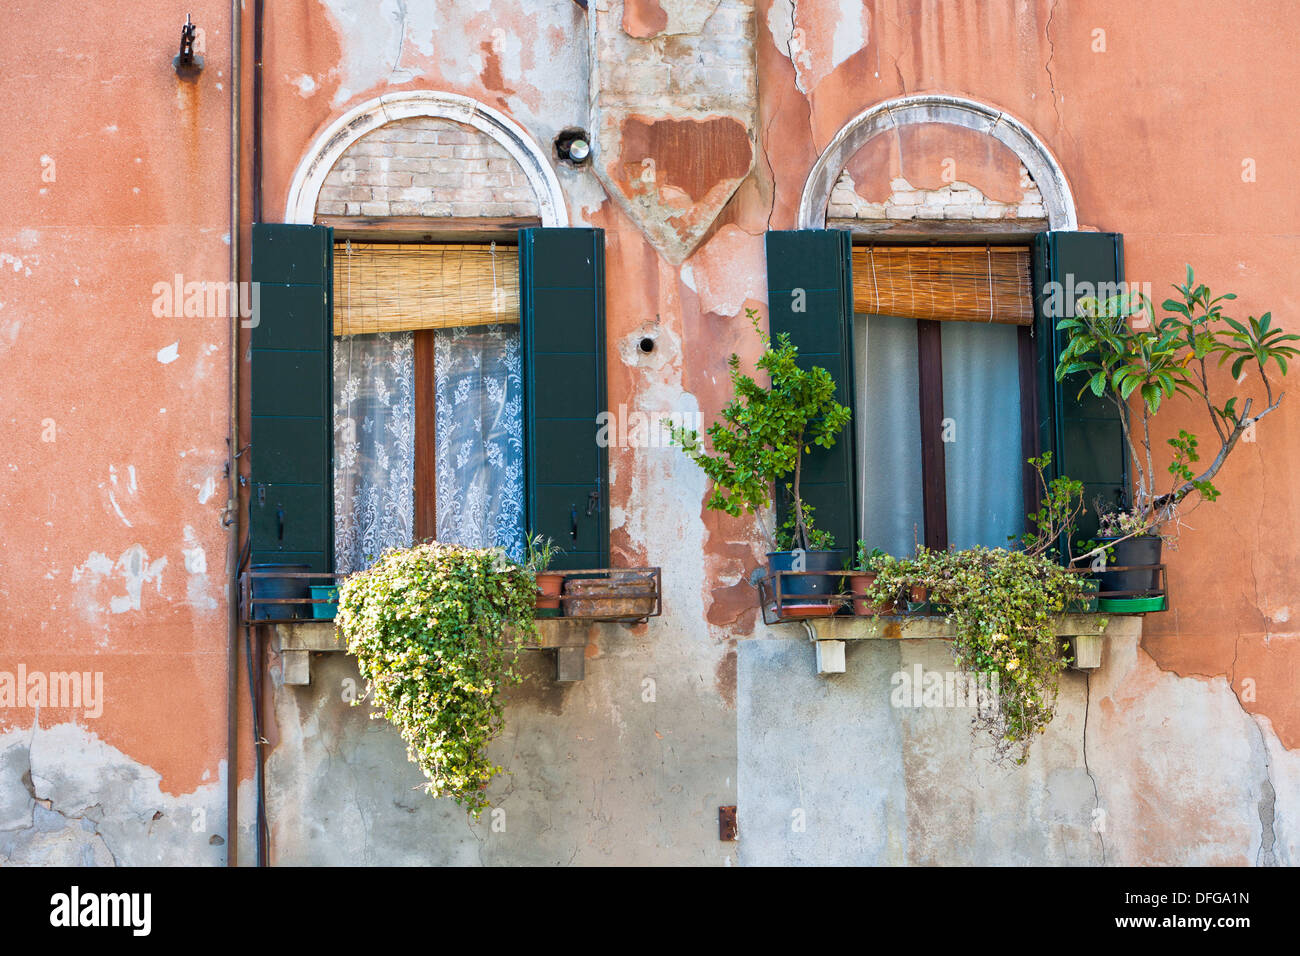 Close up of a decayed building with flowers in the windows, Venice, Italy, Europe Stock Photo